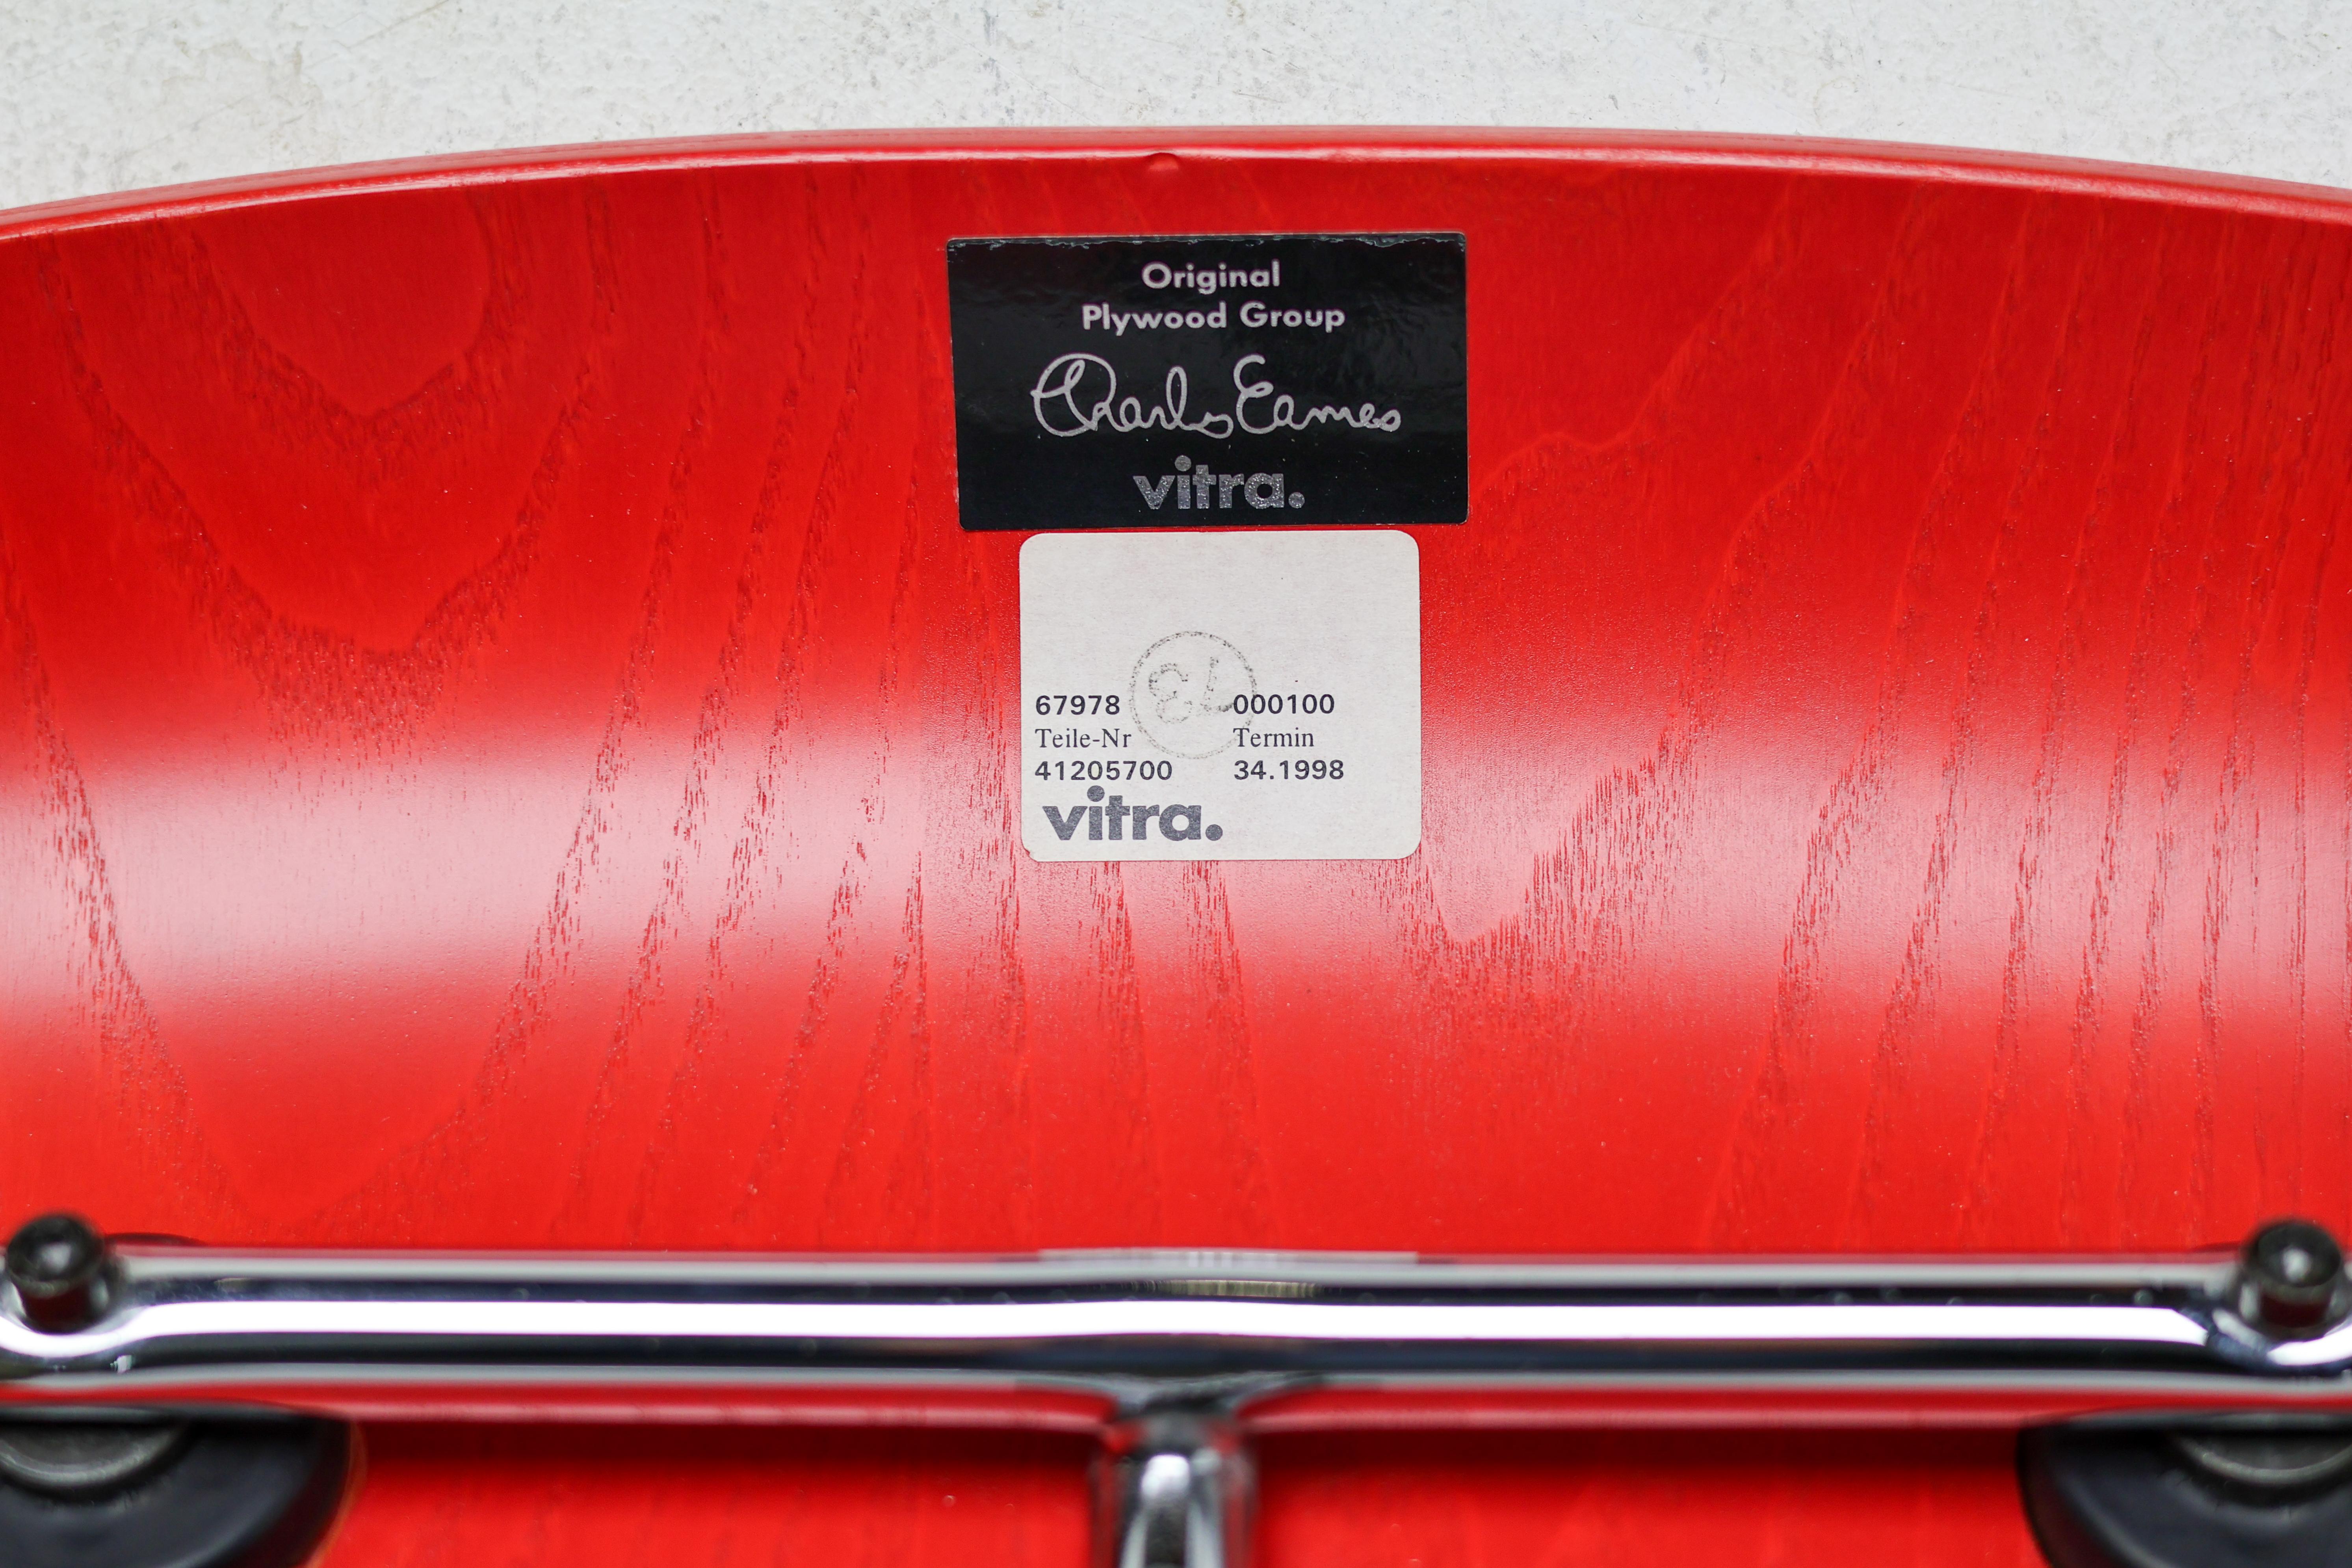 Chrome Bright Red LCM chair by Charles and Ray Eames for Vitra